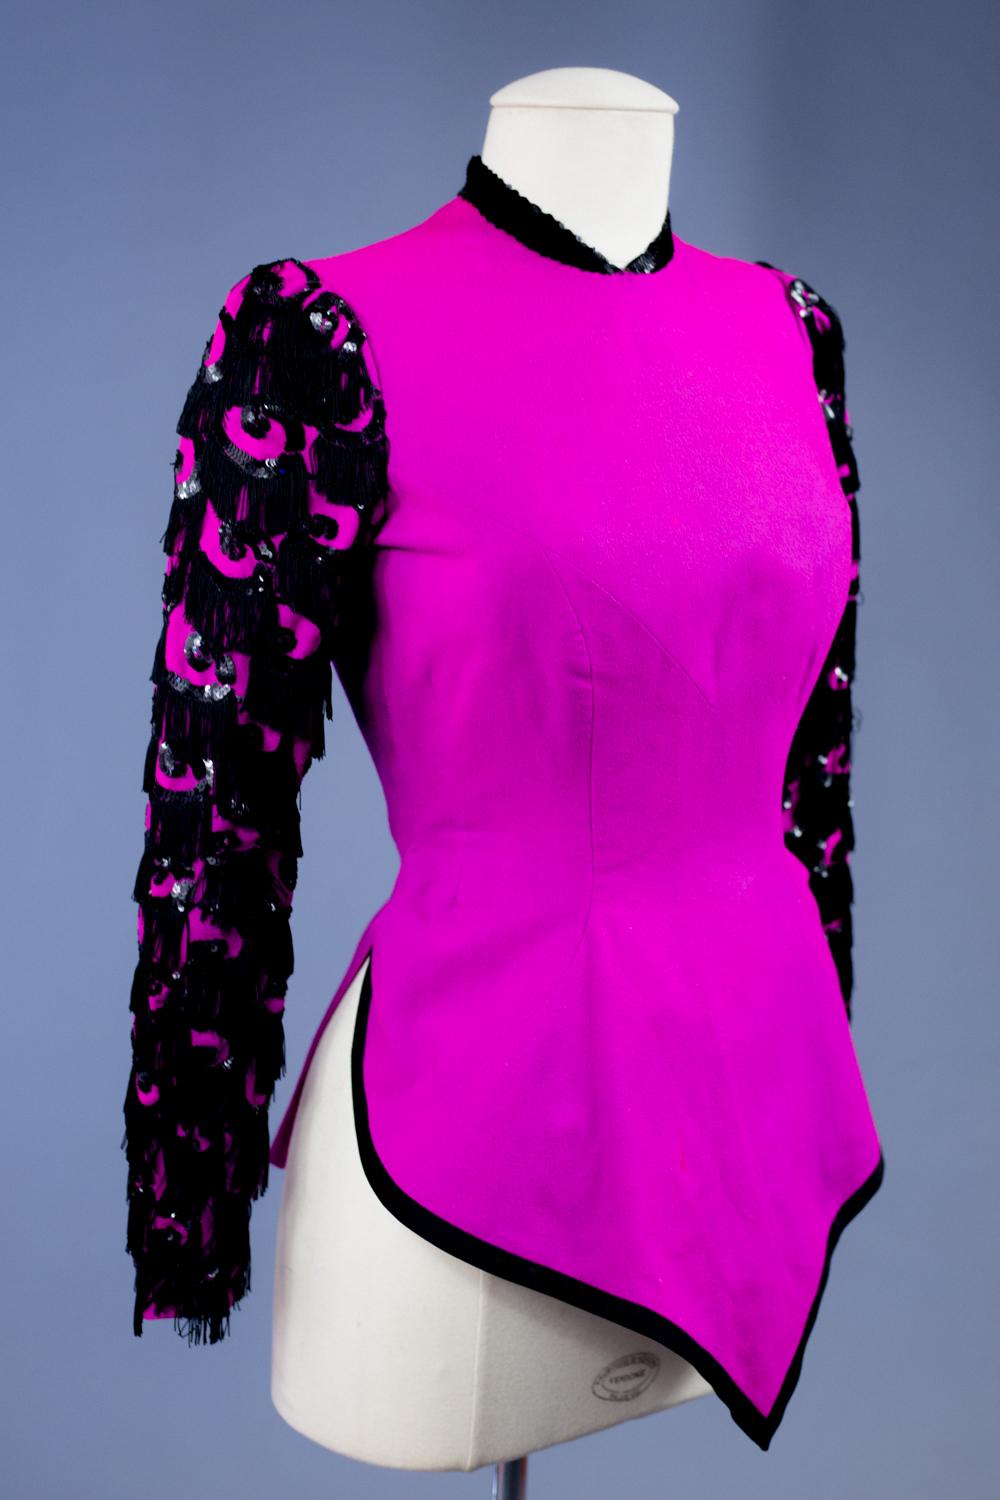 Circa 1938/1942

France

Amazing evening bolero, possibly Haute Couture Worth (oral transmission of the progeny), made of fuschia wool twill Circa 1938/1942. Curved bolero with scabbard marking the hips, with diagonal cut in diamonds. Officer collar